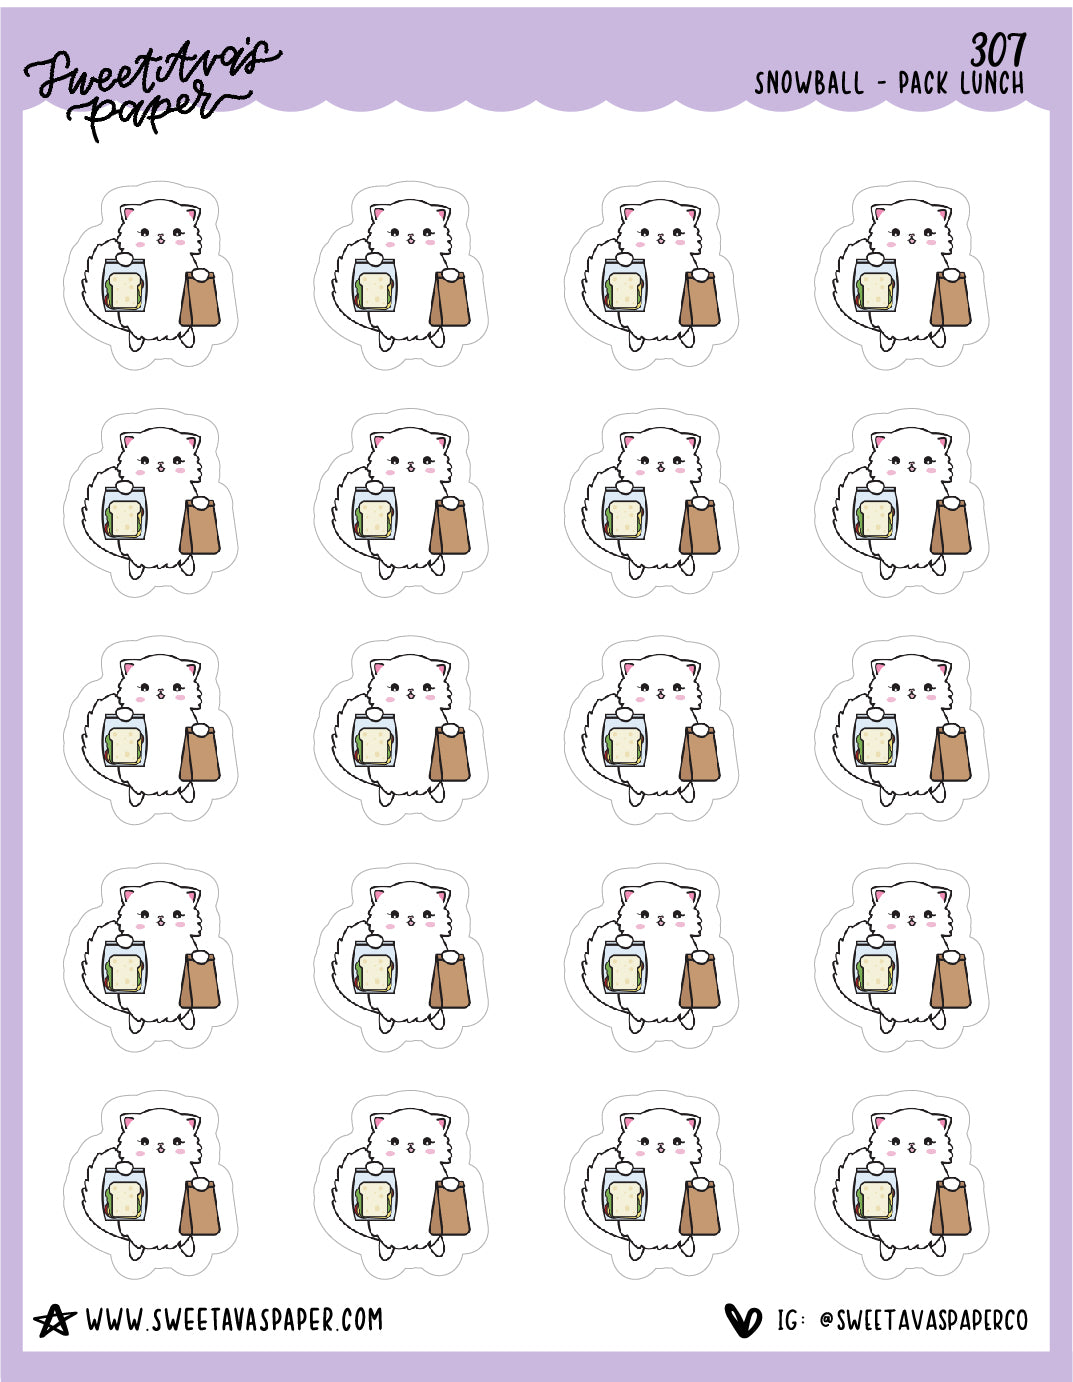 Pack Lunch Planner Stickers - Snowball The Cat - [307]